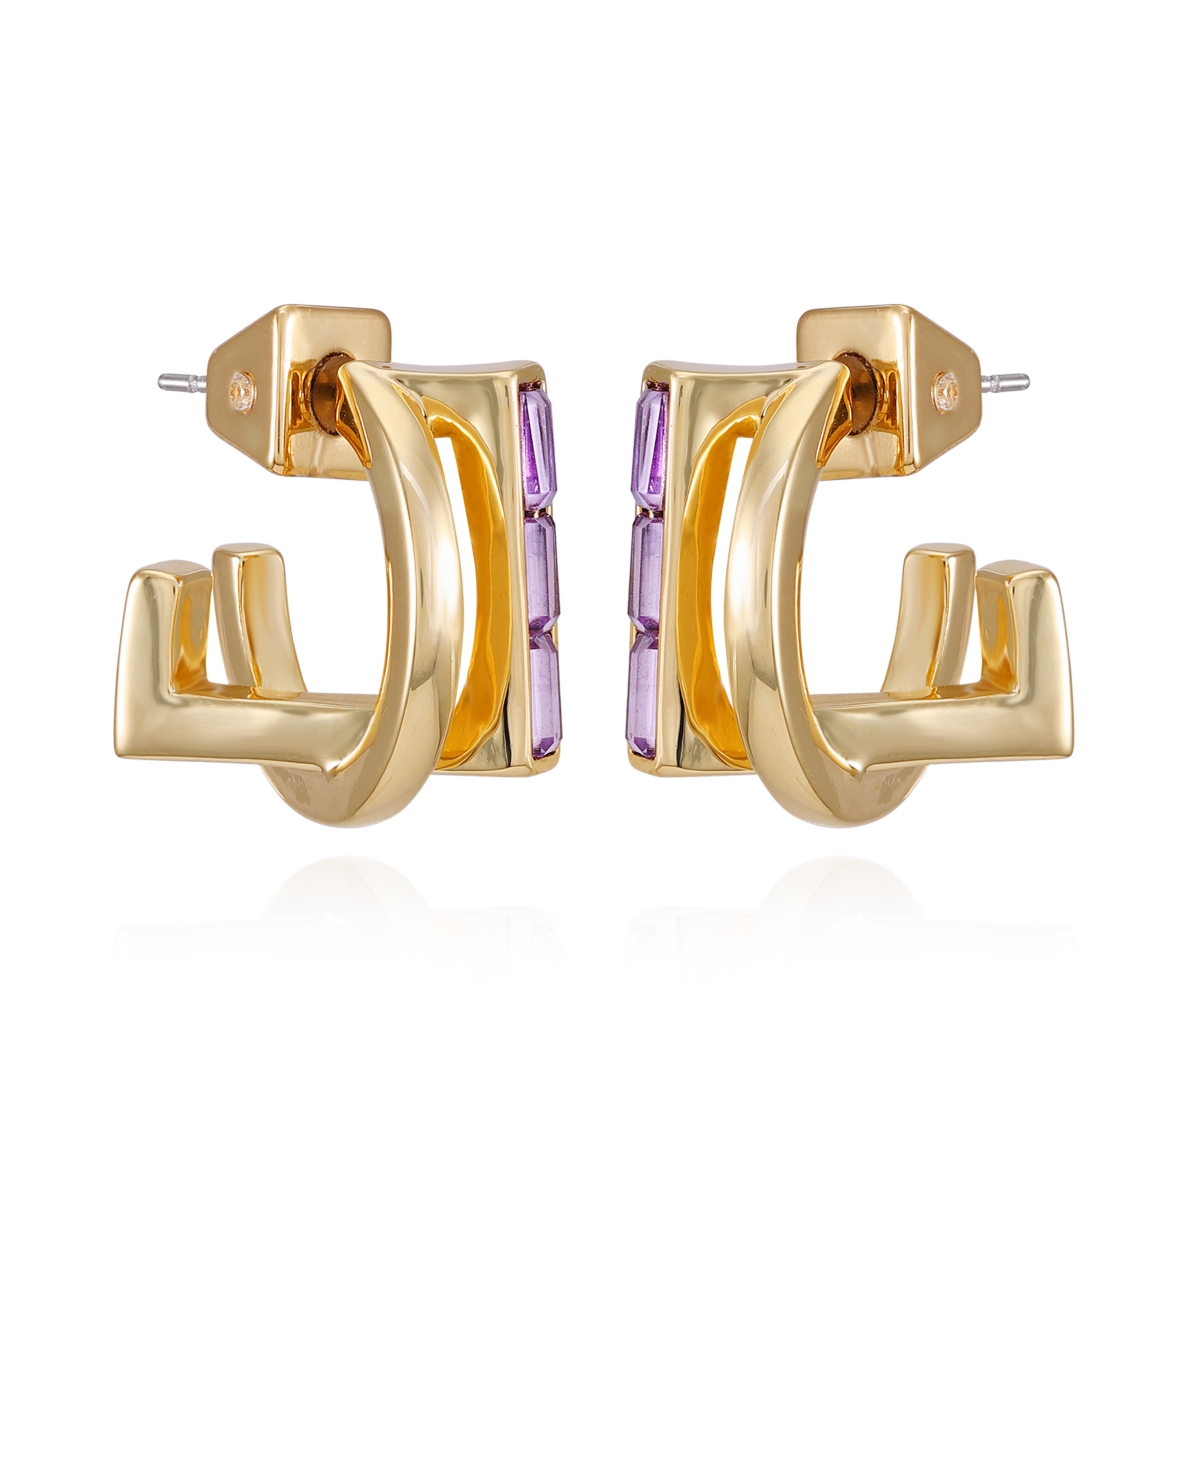 Gold-Tone Square Hoop Earrings - Gold